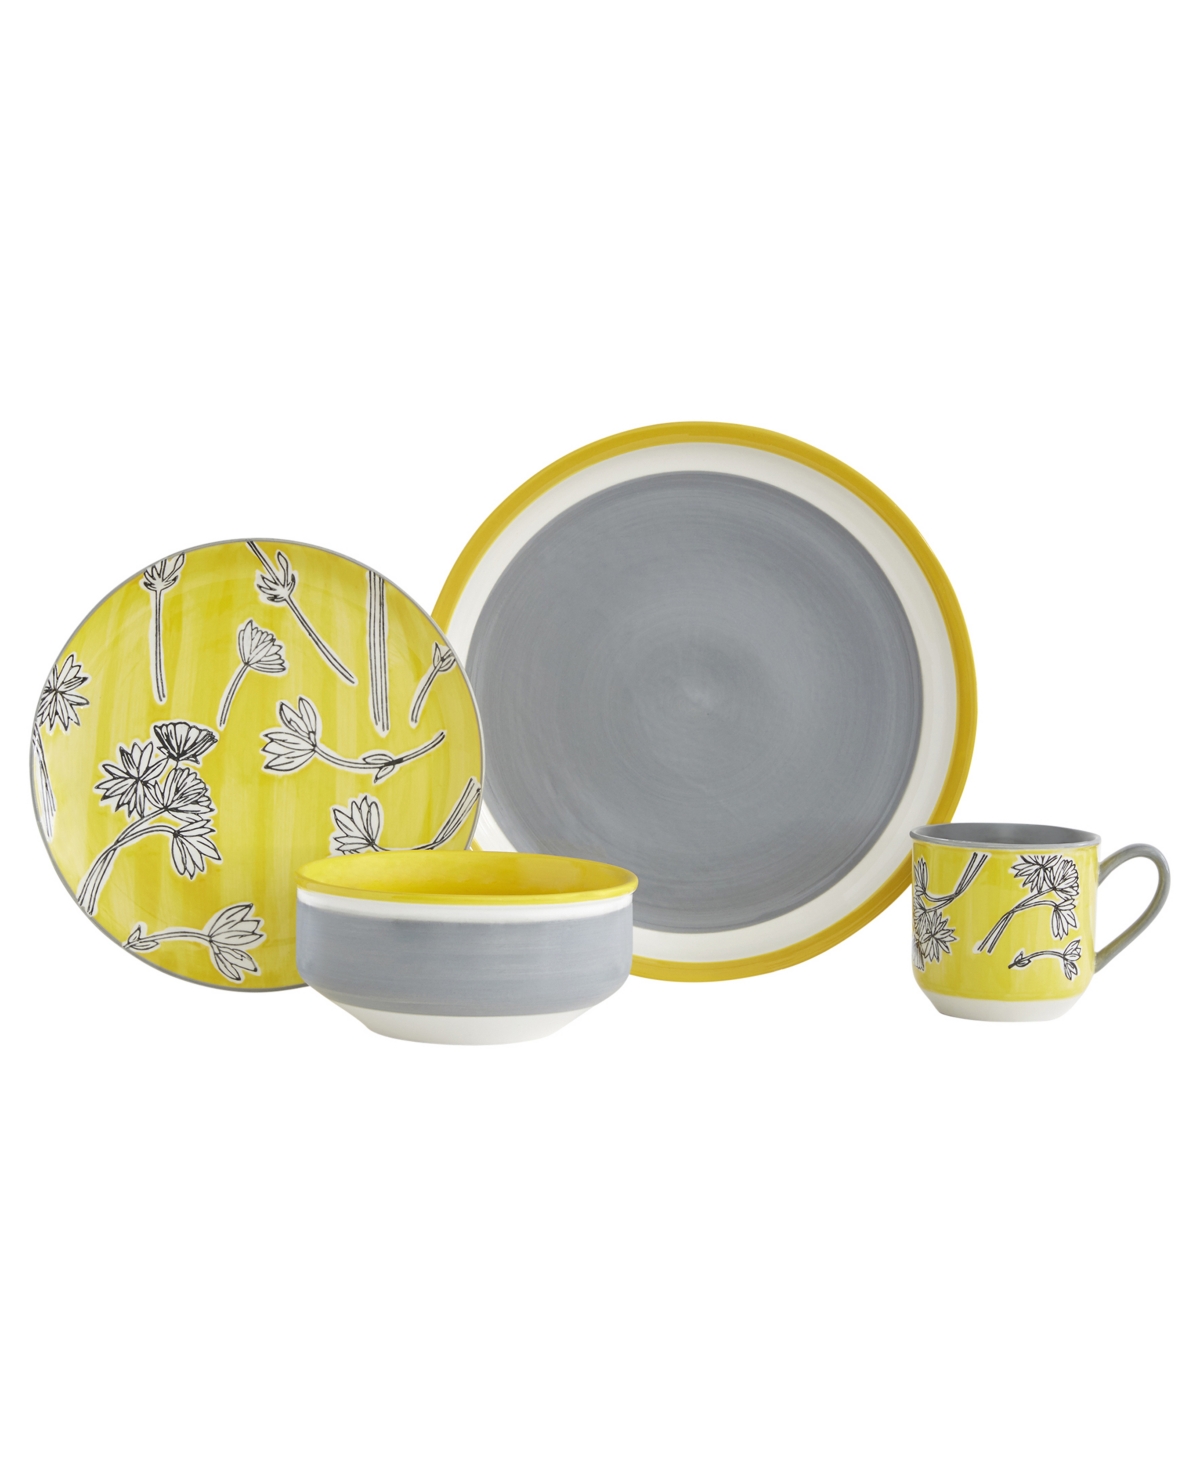 Sunny Floral 16 Pc. Dinnerware Set, Service for 4 - Yellow